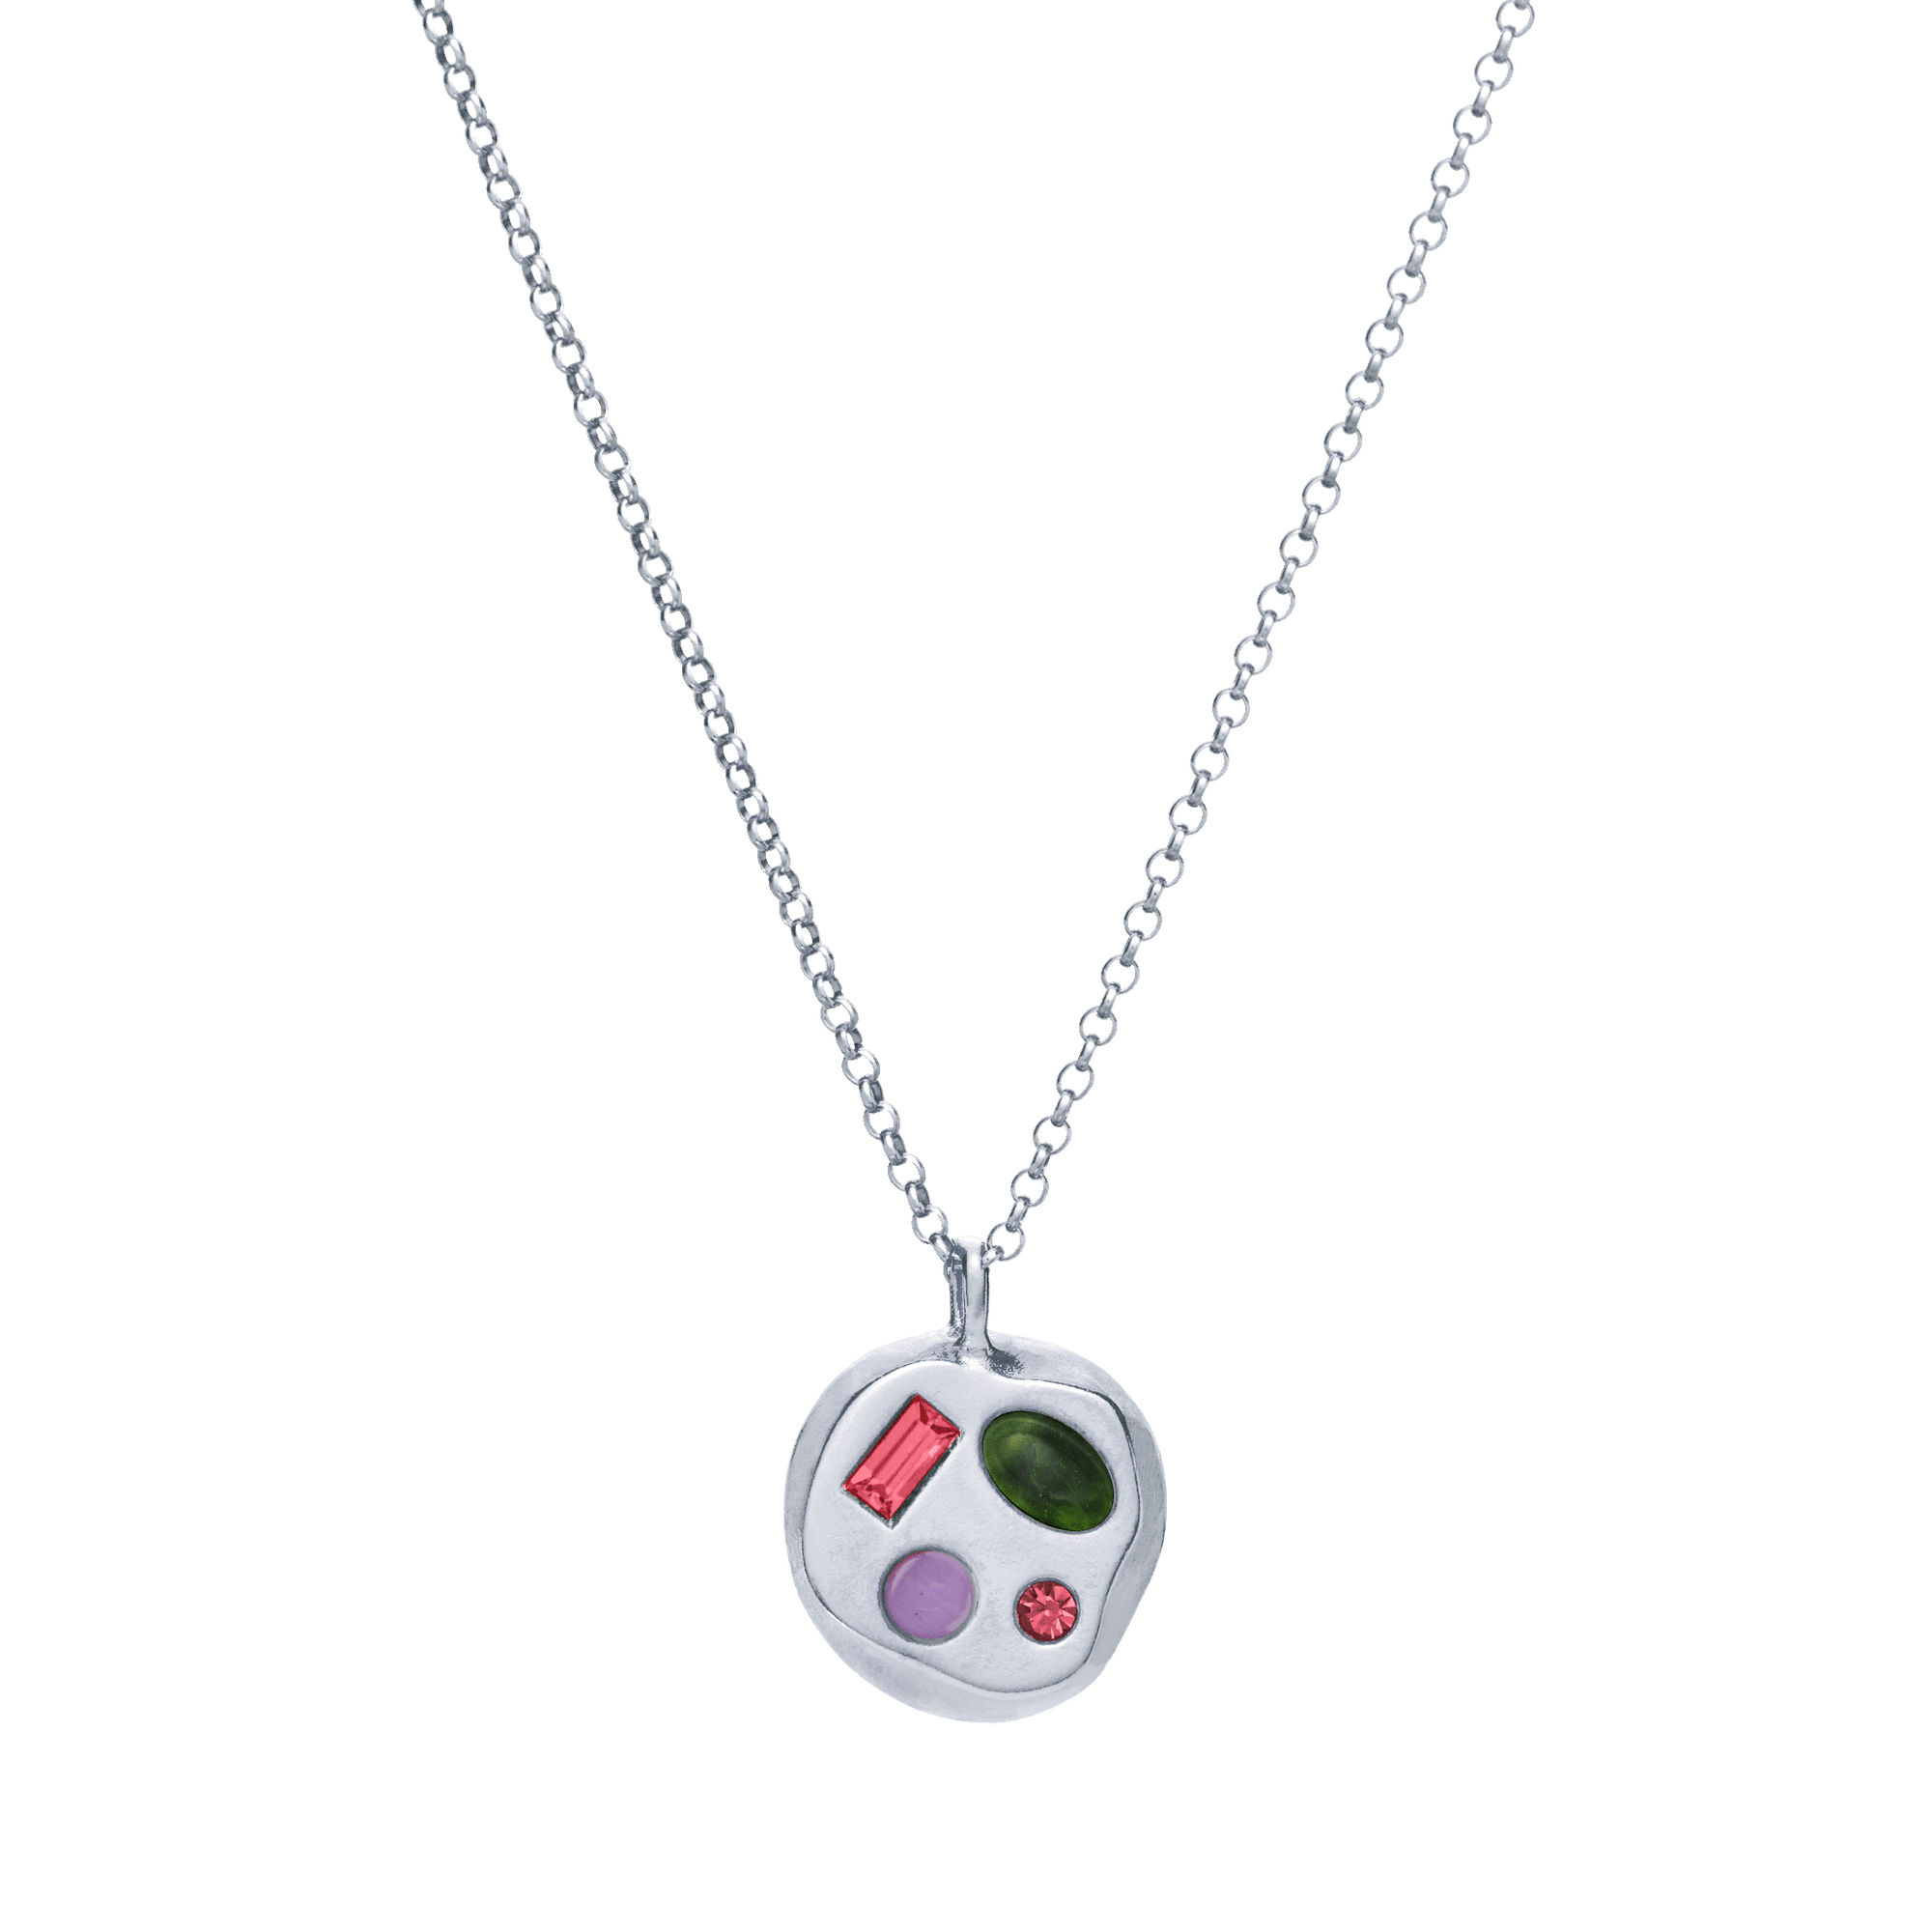 The January Nineteenth Pendant in Sterling Silver